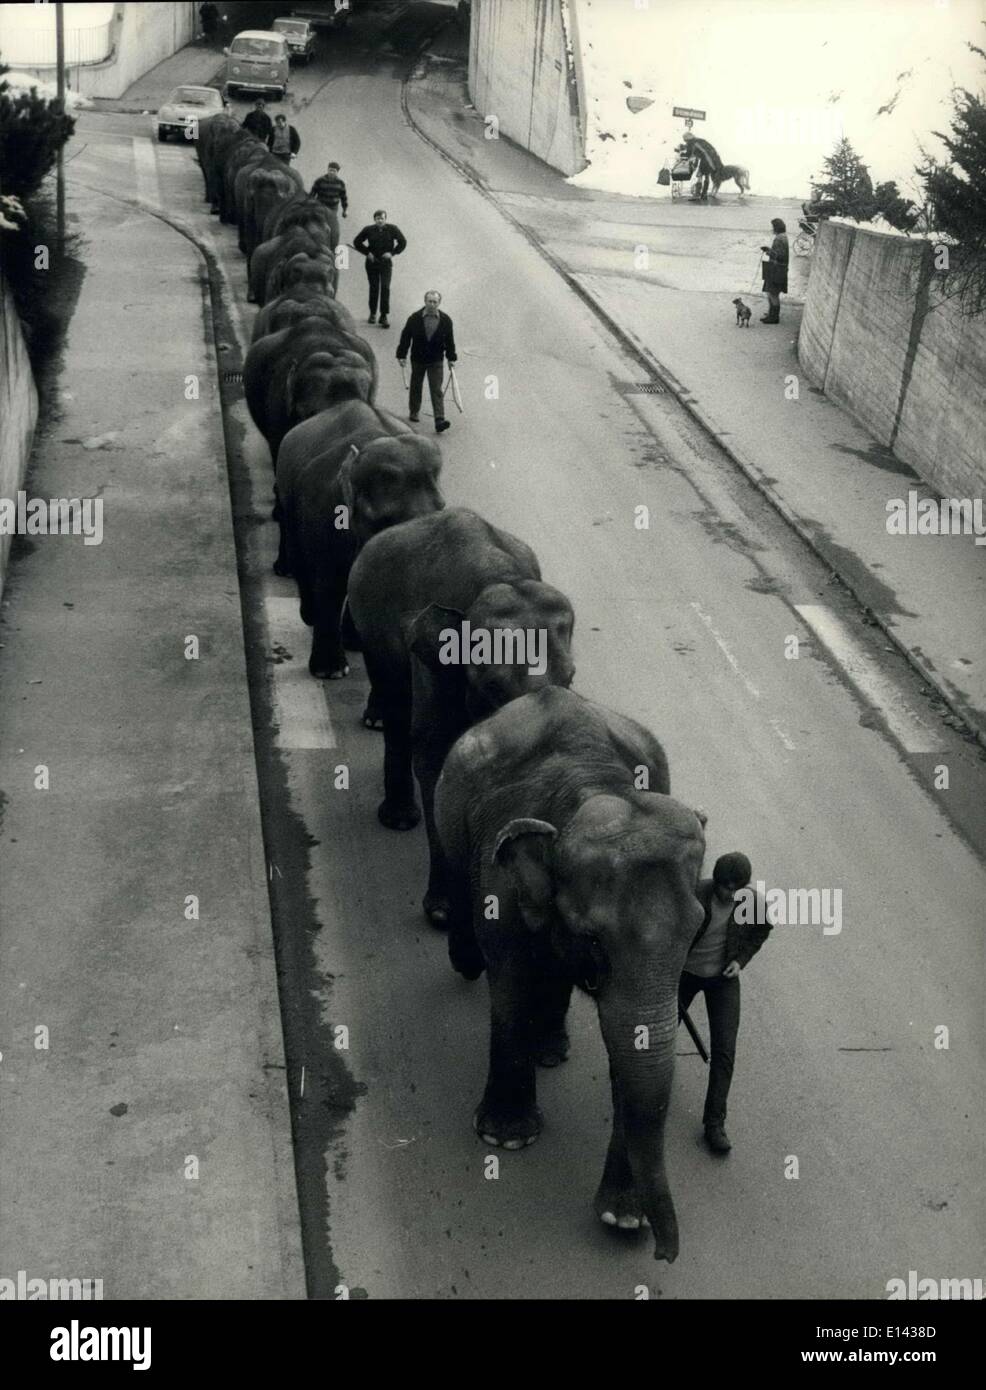 Mar. 31, 2012 - Elephant walk in the first days of spring. The Swiss national circus Knie now soon will leave its winter camp in Rappesrwill. These last quiet days fortunately the first charming spring-days, the large elephant family, composed fo 14 members, goes out for a leisurely walk in the street of Rapperswill. Keystone Zurich 10-3-70 Stock Photo